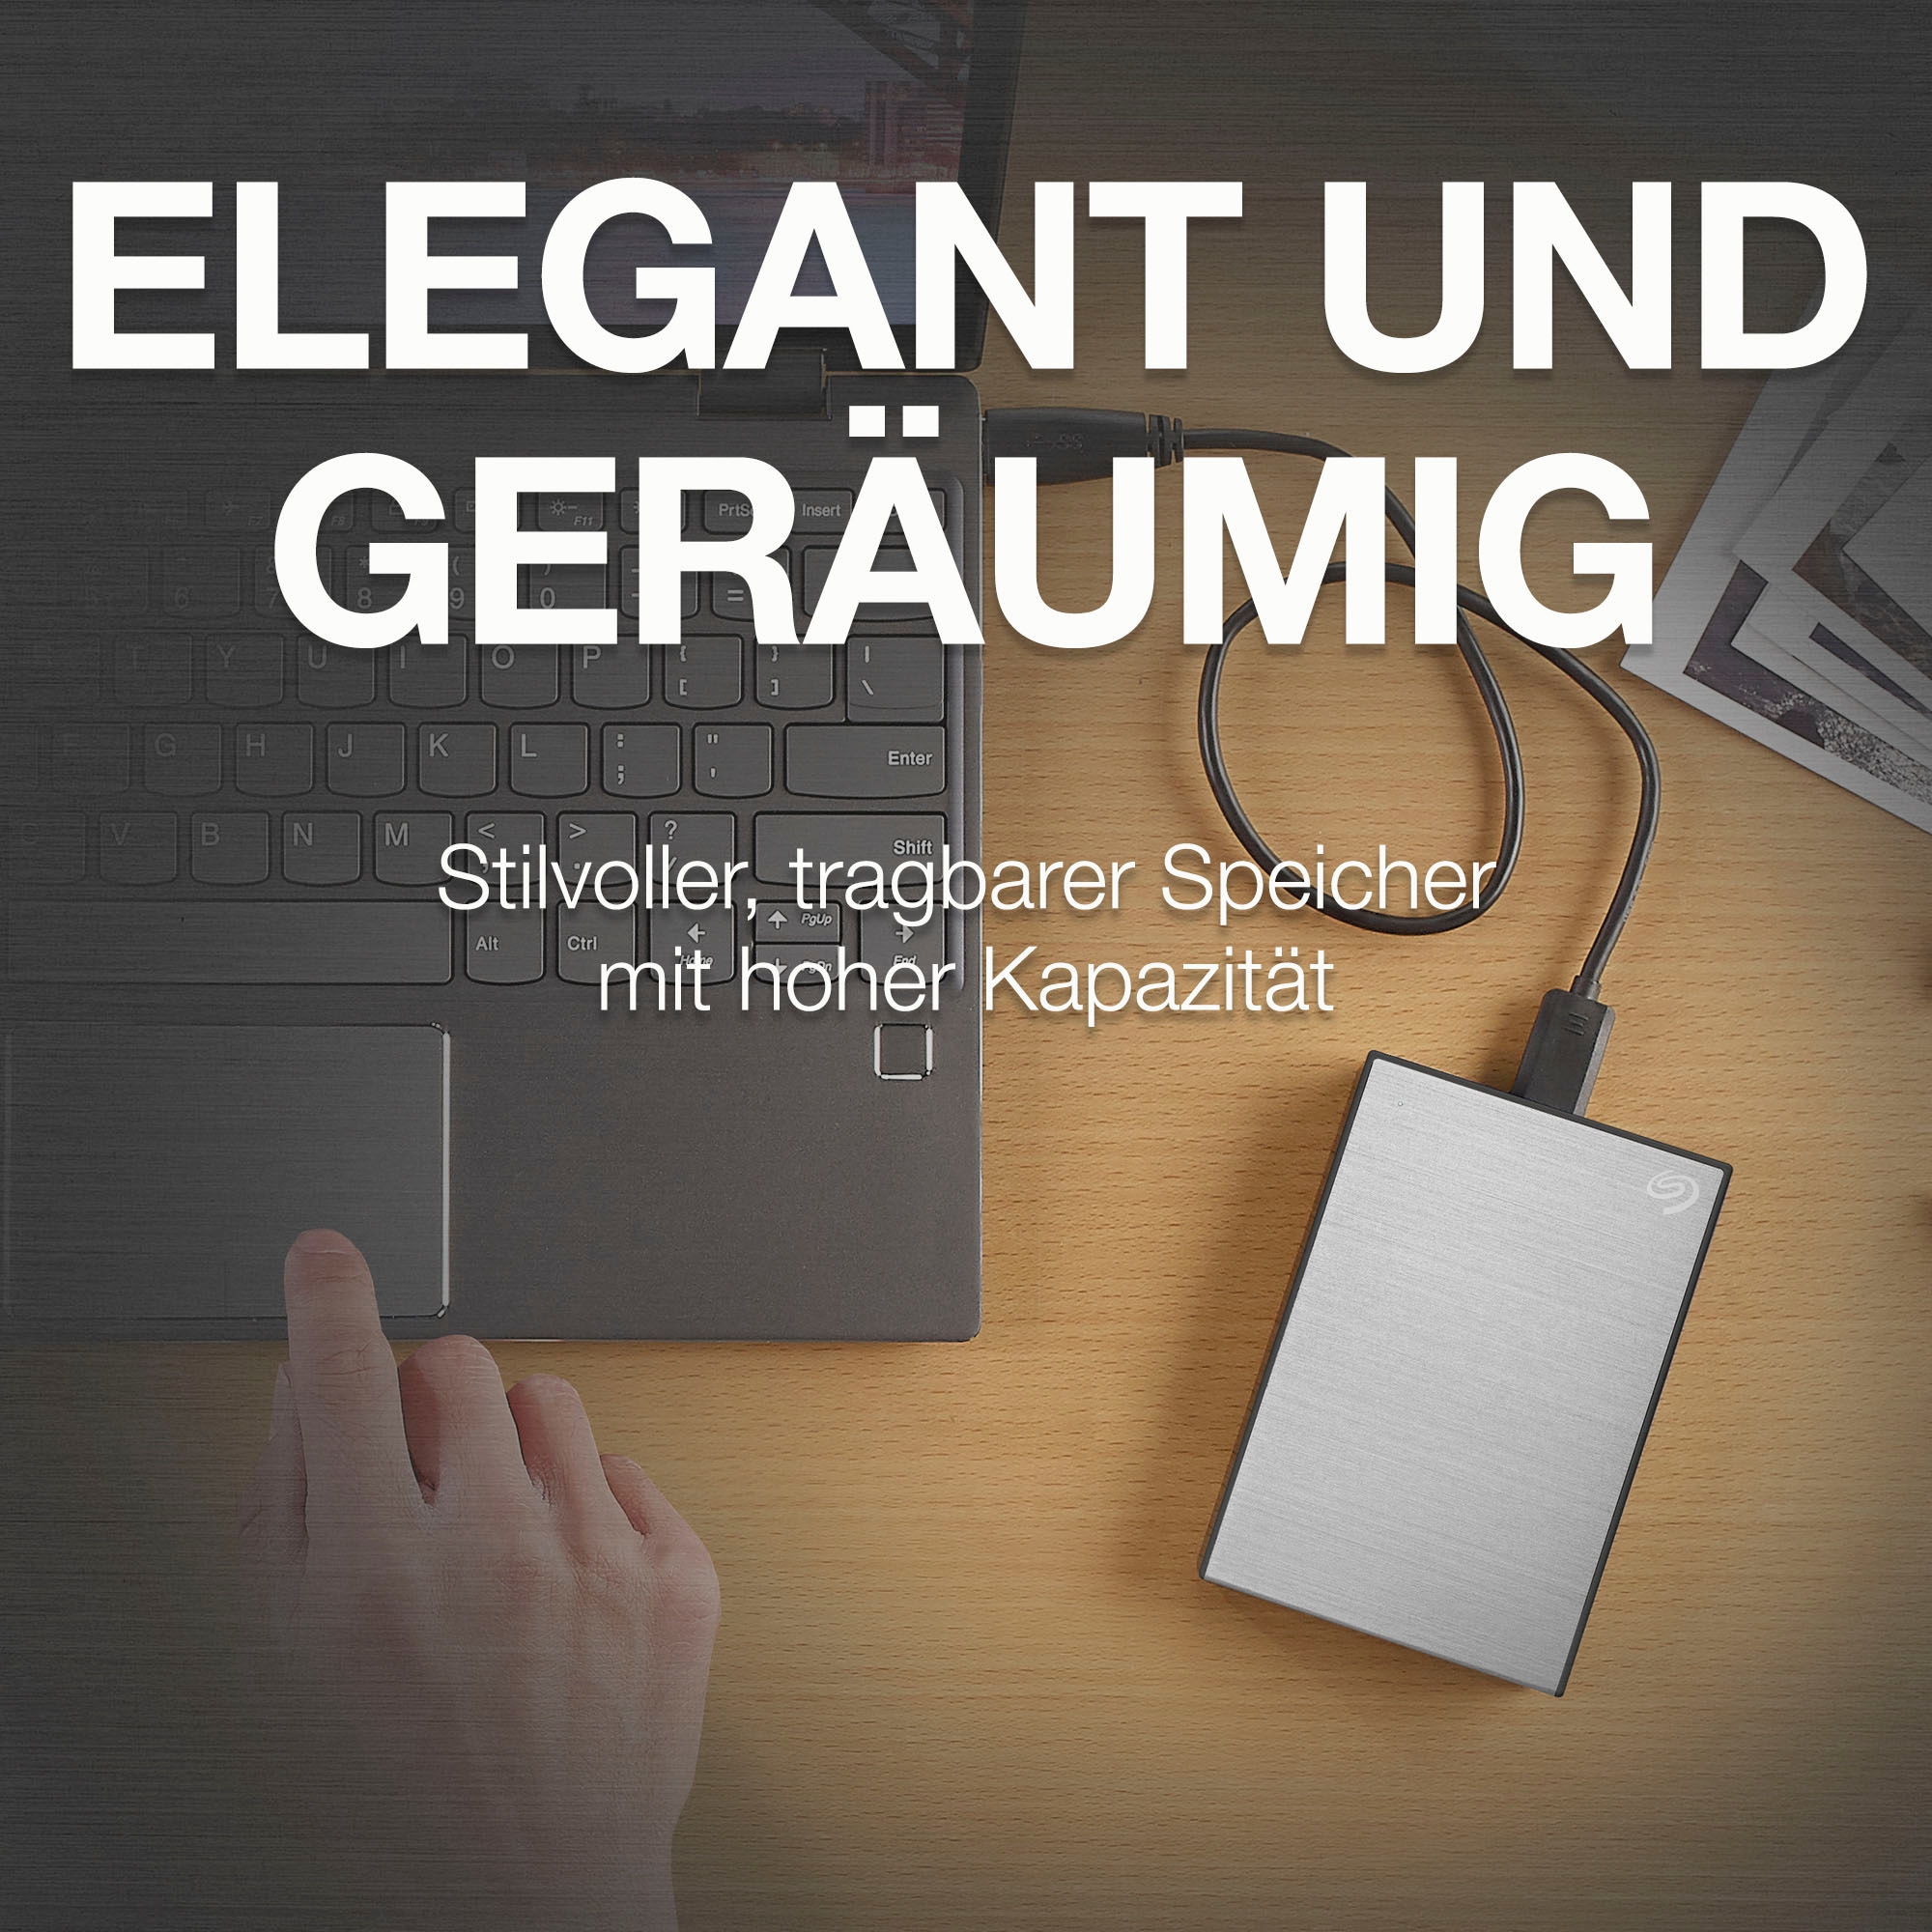 Seagate externe HDD-Festplatte Recovery Rescue Jahre Garantie | Zoll, »One XXL 2,5 UNIVERSAL ➥ Jahre Services Drive Portable Touch 2 3 Anschluss Inklusive 1TB«, 3.2, Data USB